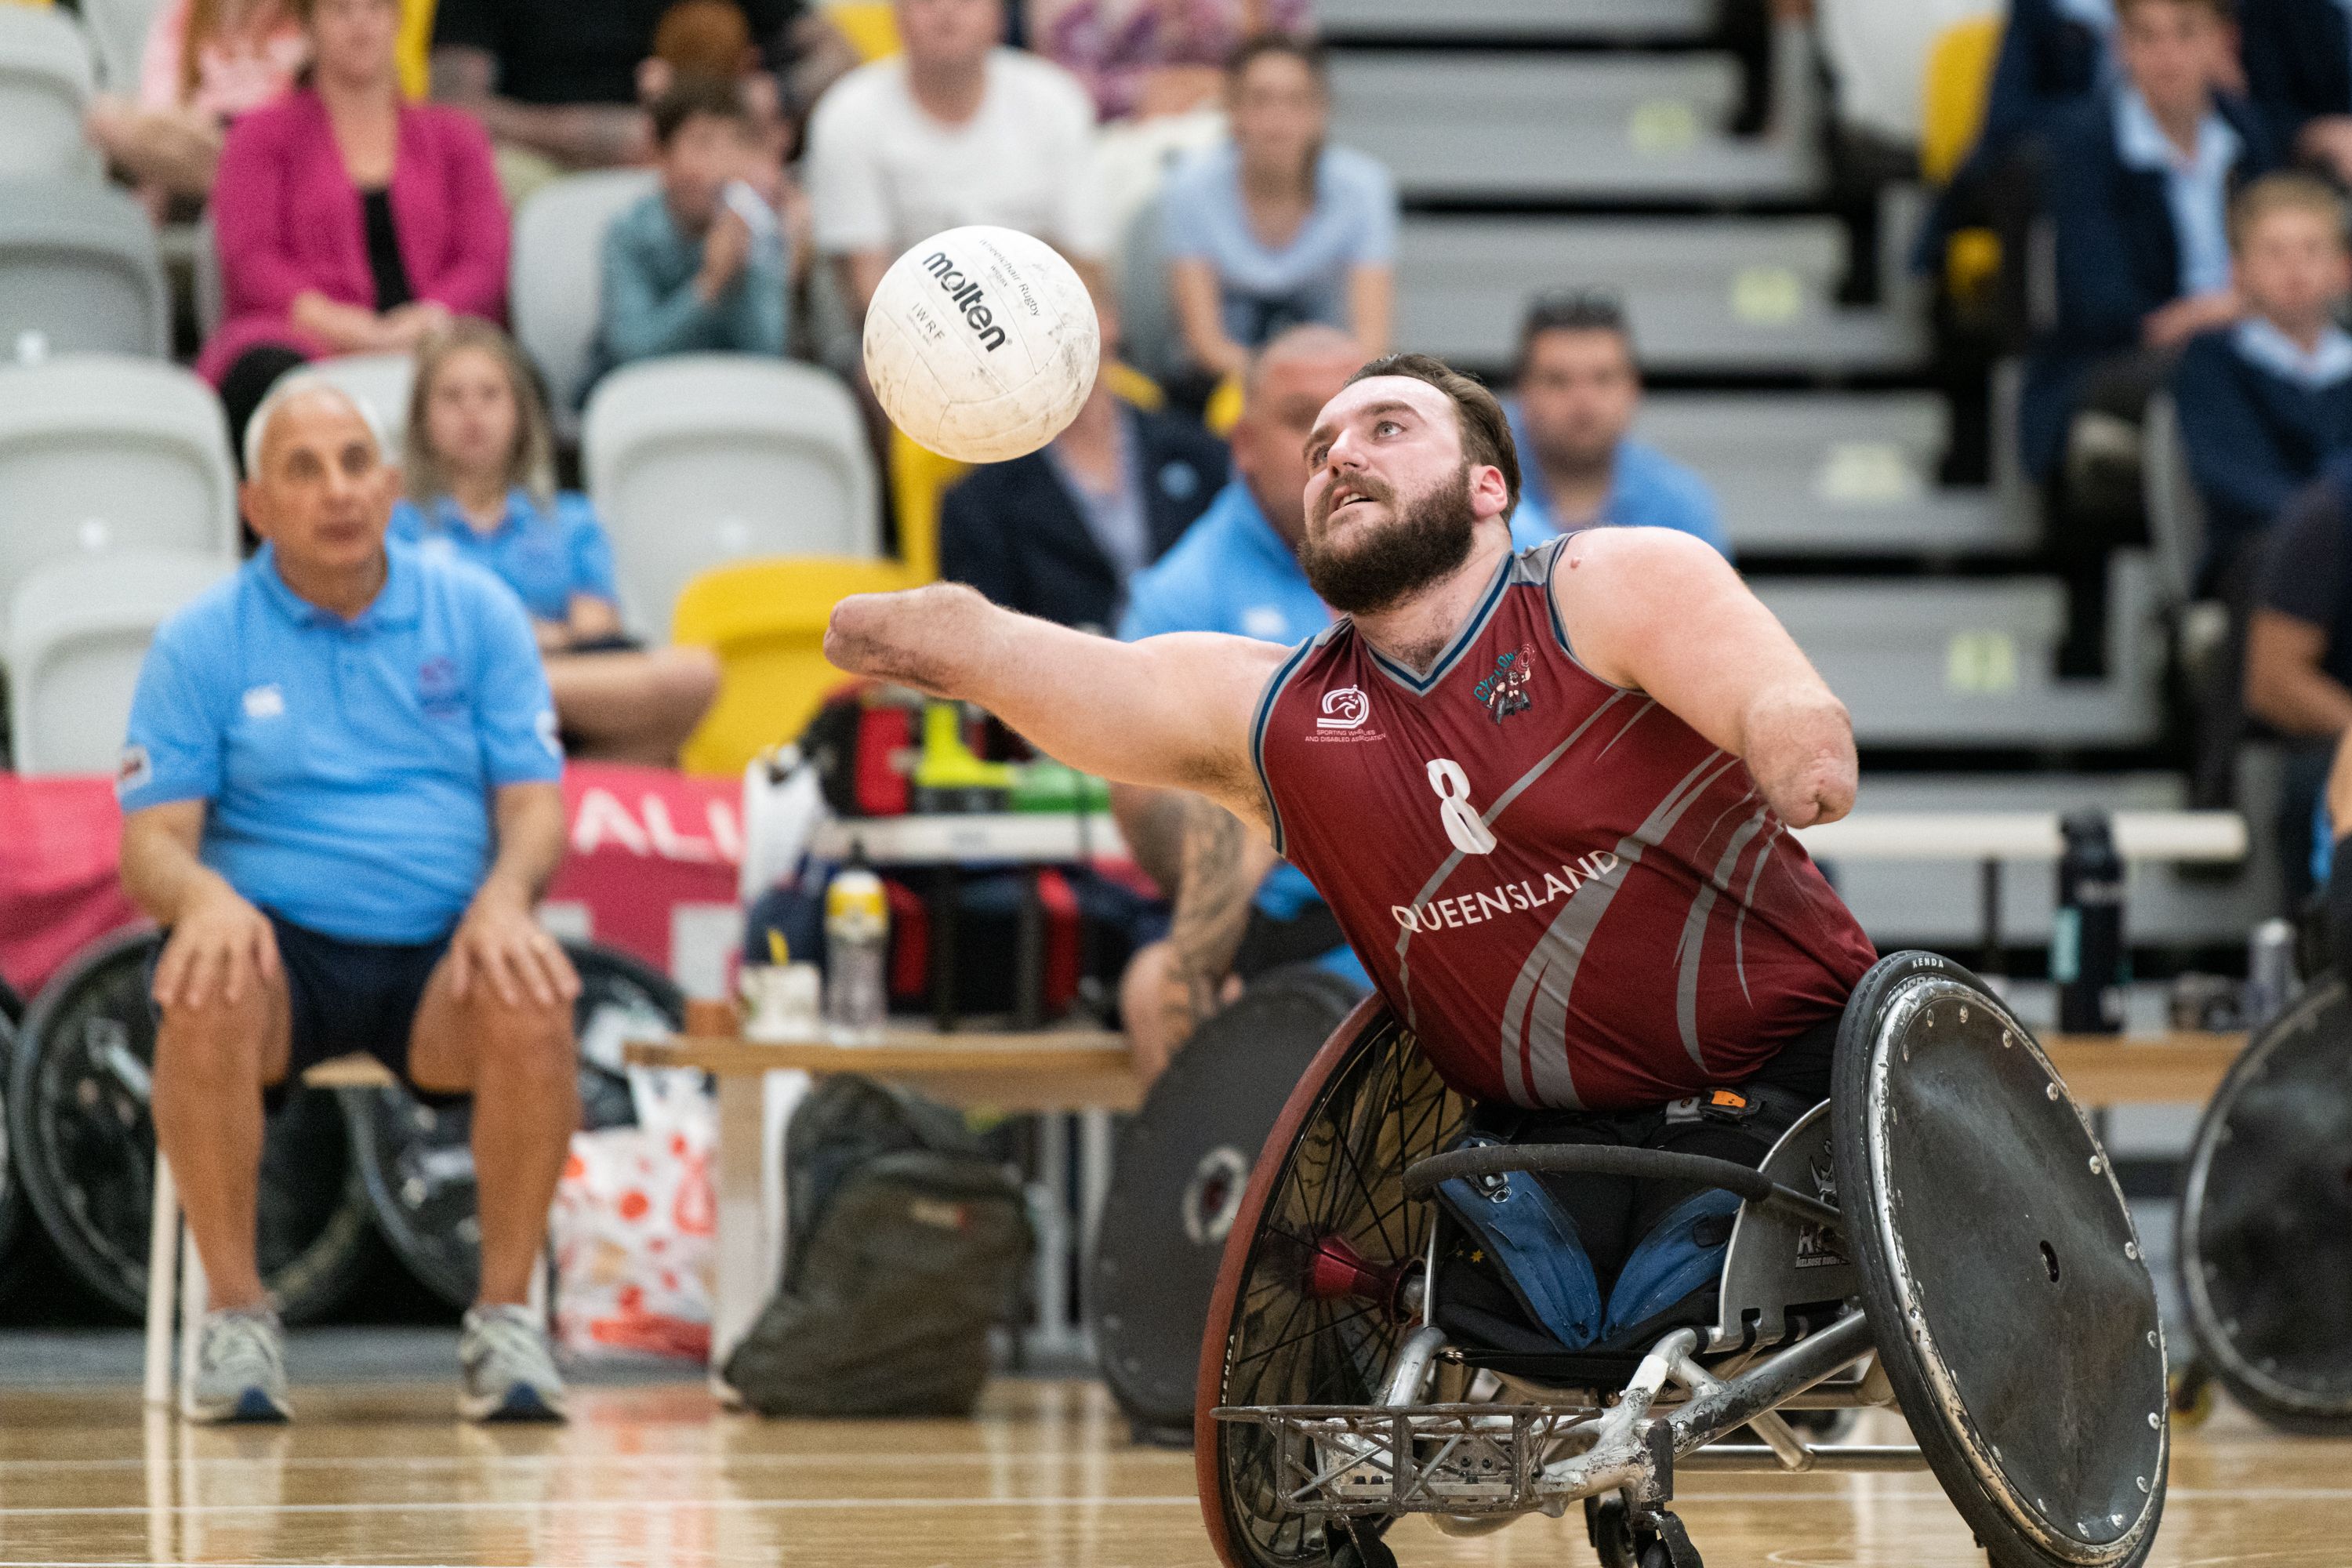 Wheelchair rugby player competes for the ball while the crowd watches on